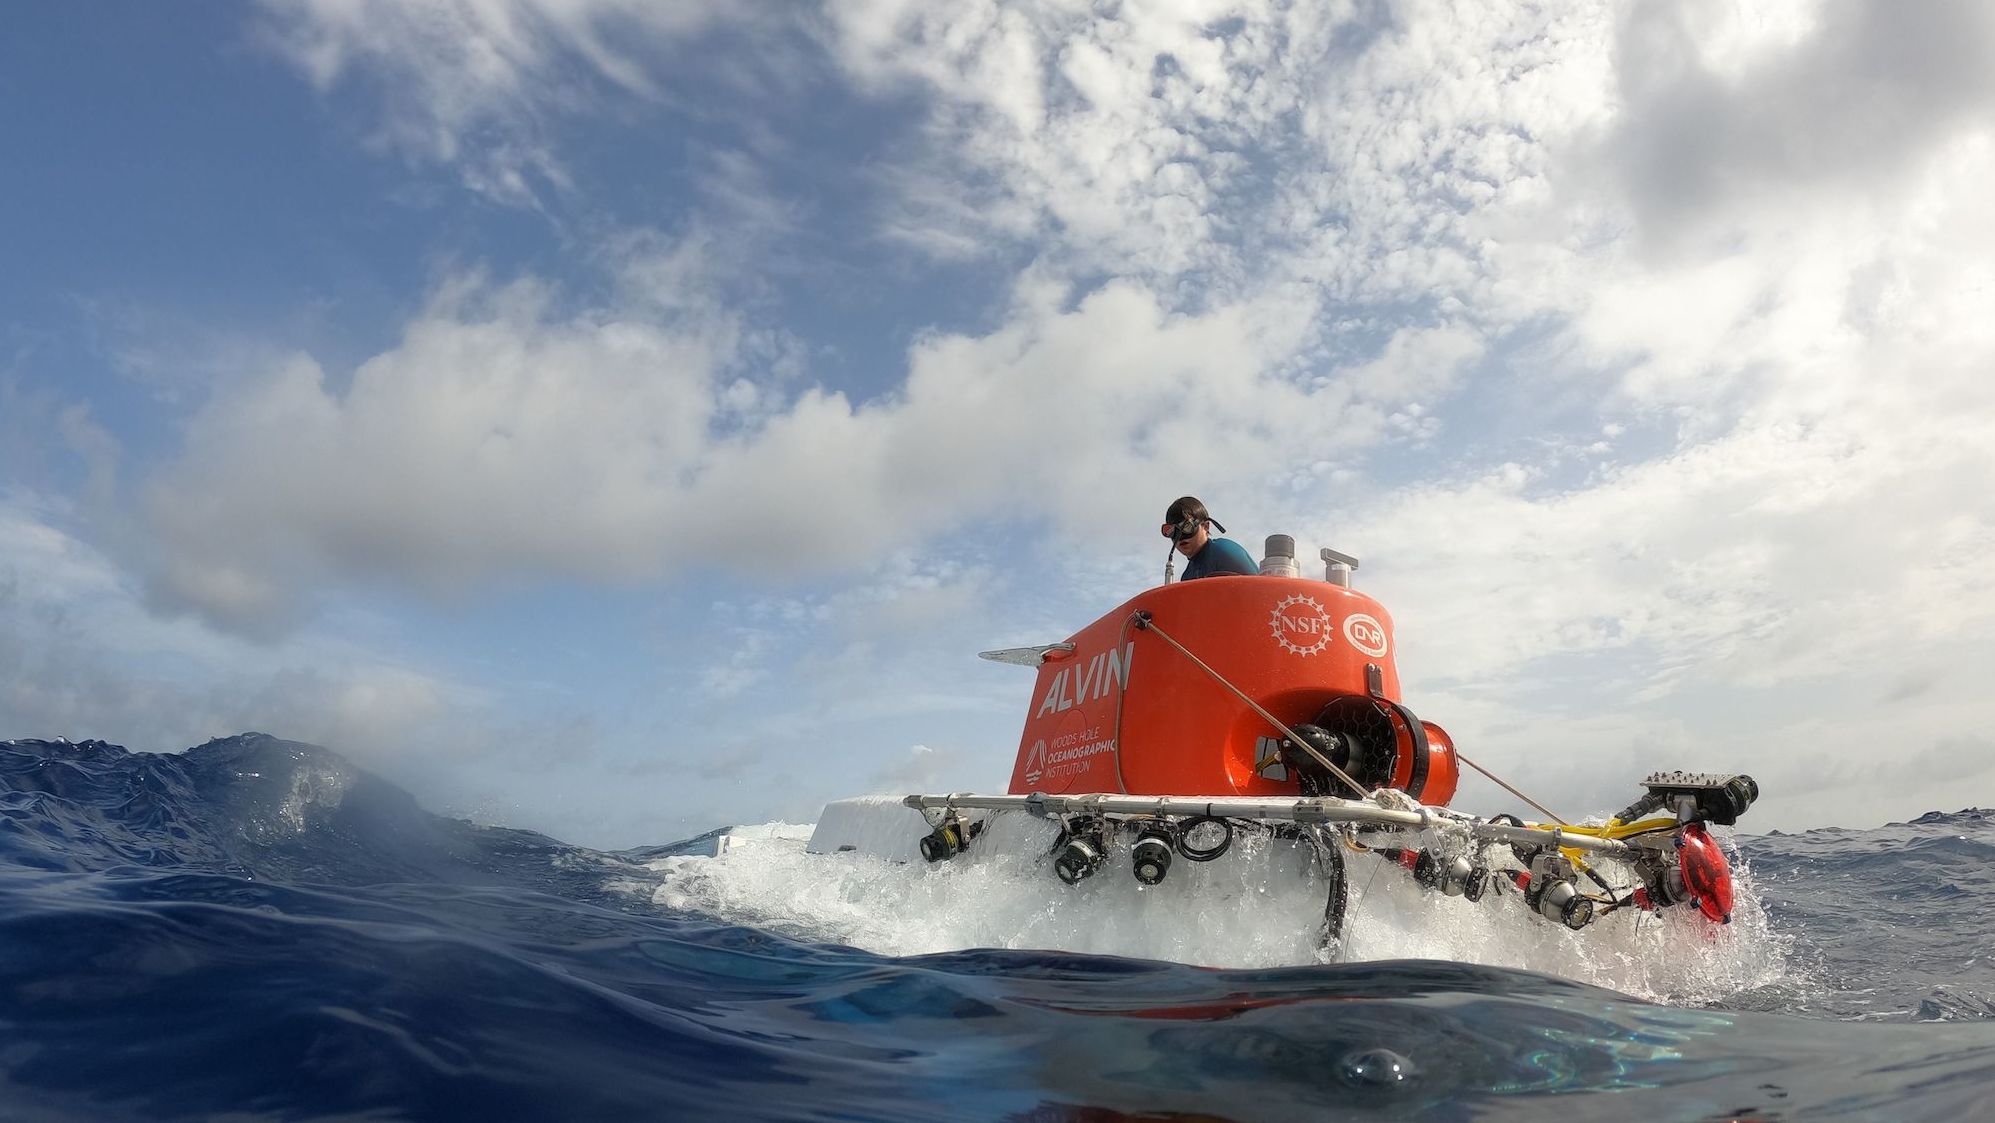 With its upgrades, Alvin is capable of diving 4 miles beneath the ocean's surface after rigorous testing.